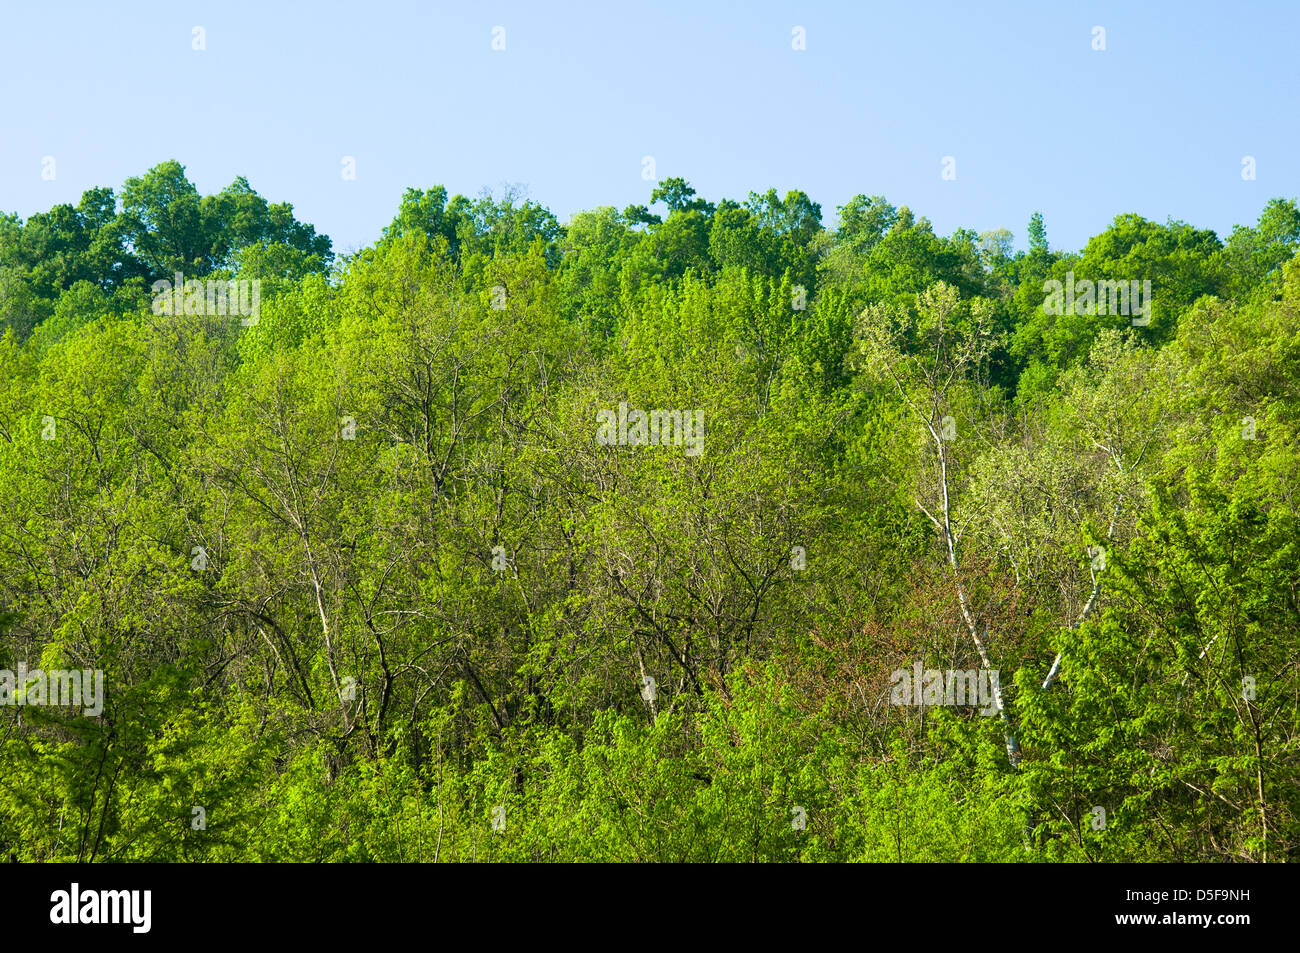 Green foilage in early spring on forest trees in the Ozark Mountains of Arkansas. Stock Photo